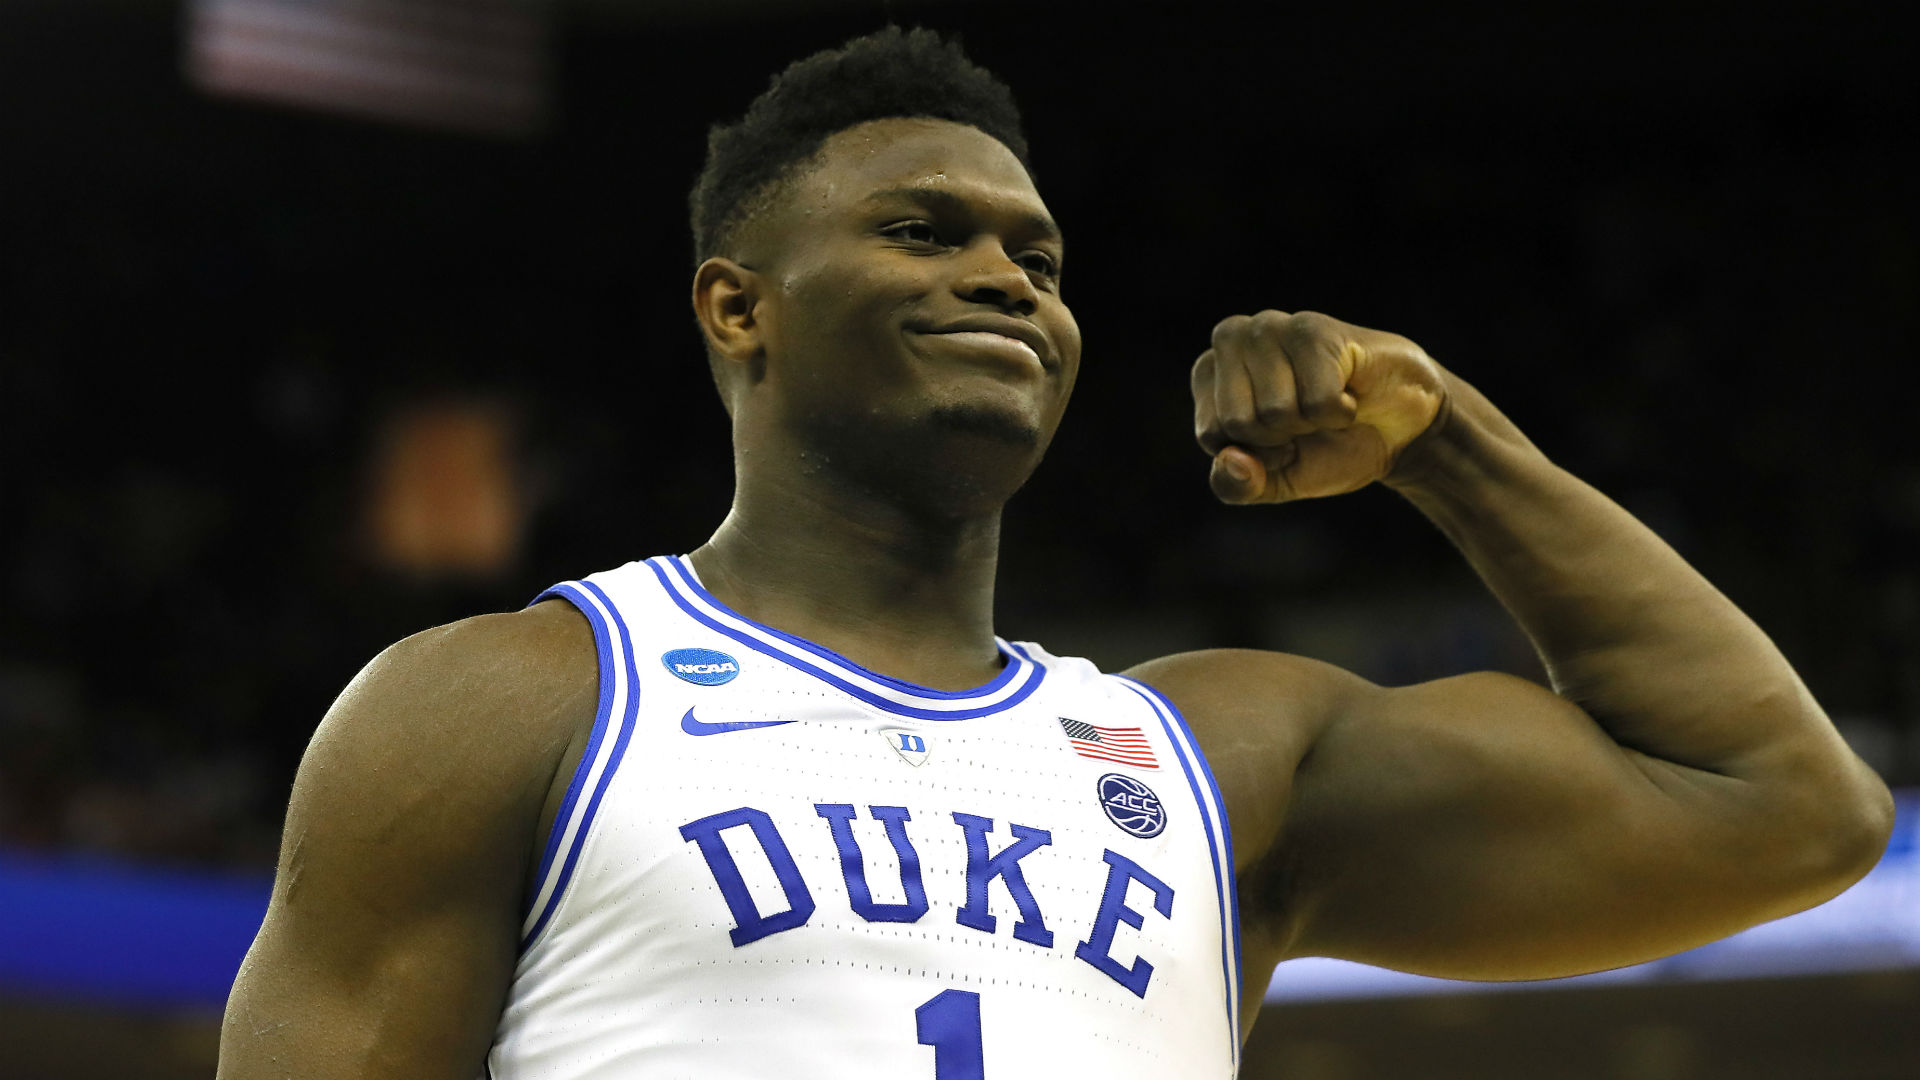 NBA Draft 2019: What are the best player comparisons for Zion Williamson? | NBA.com ...1920 x 1080